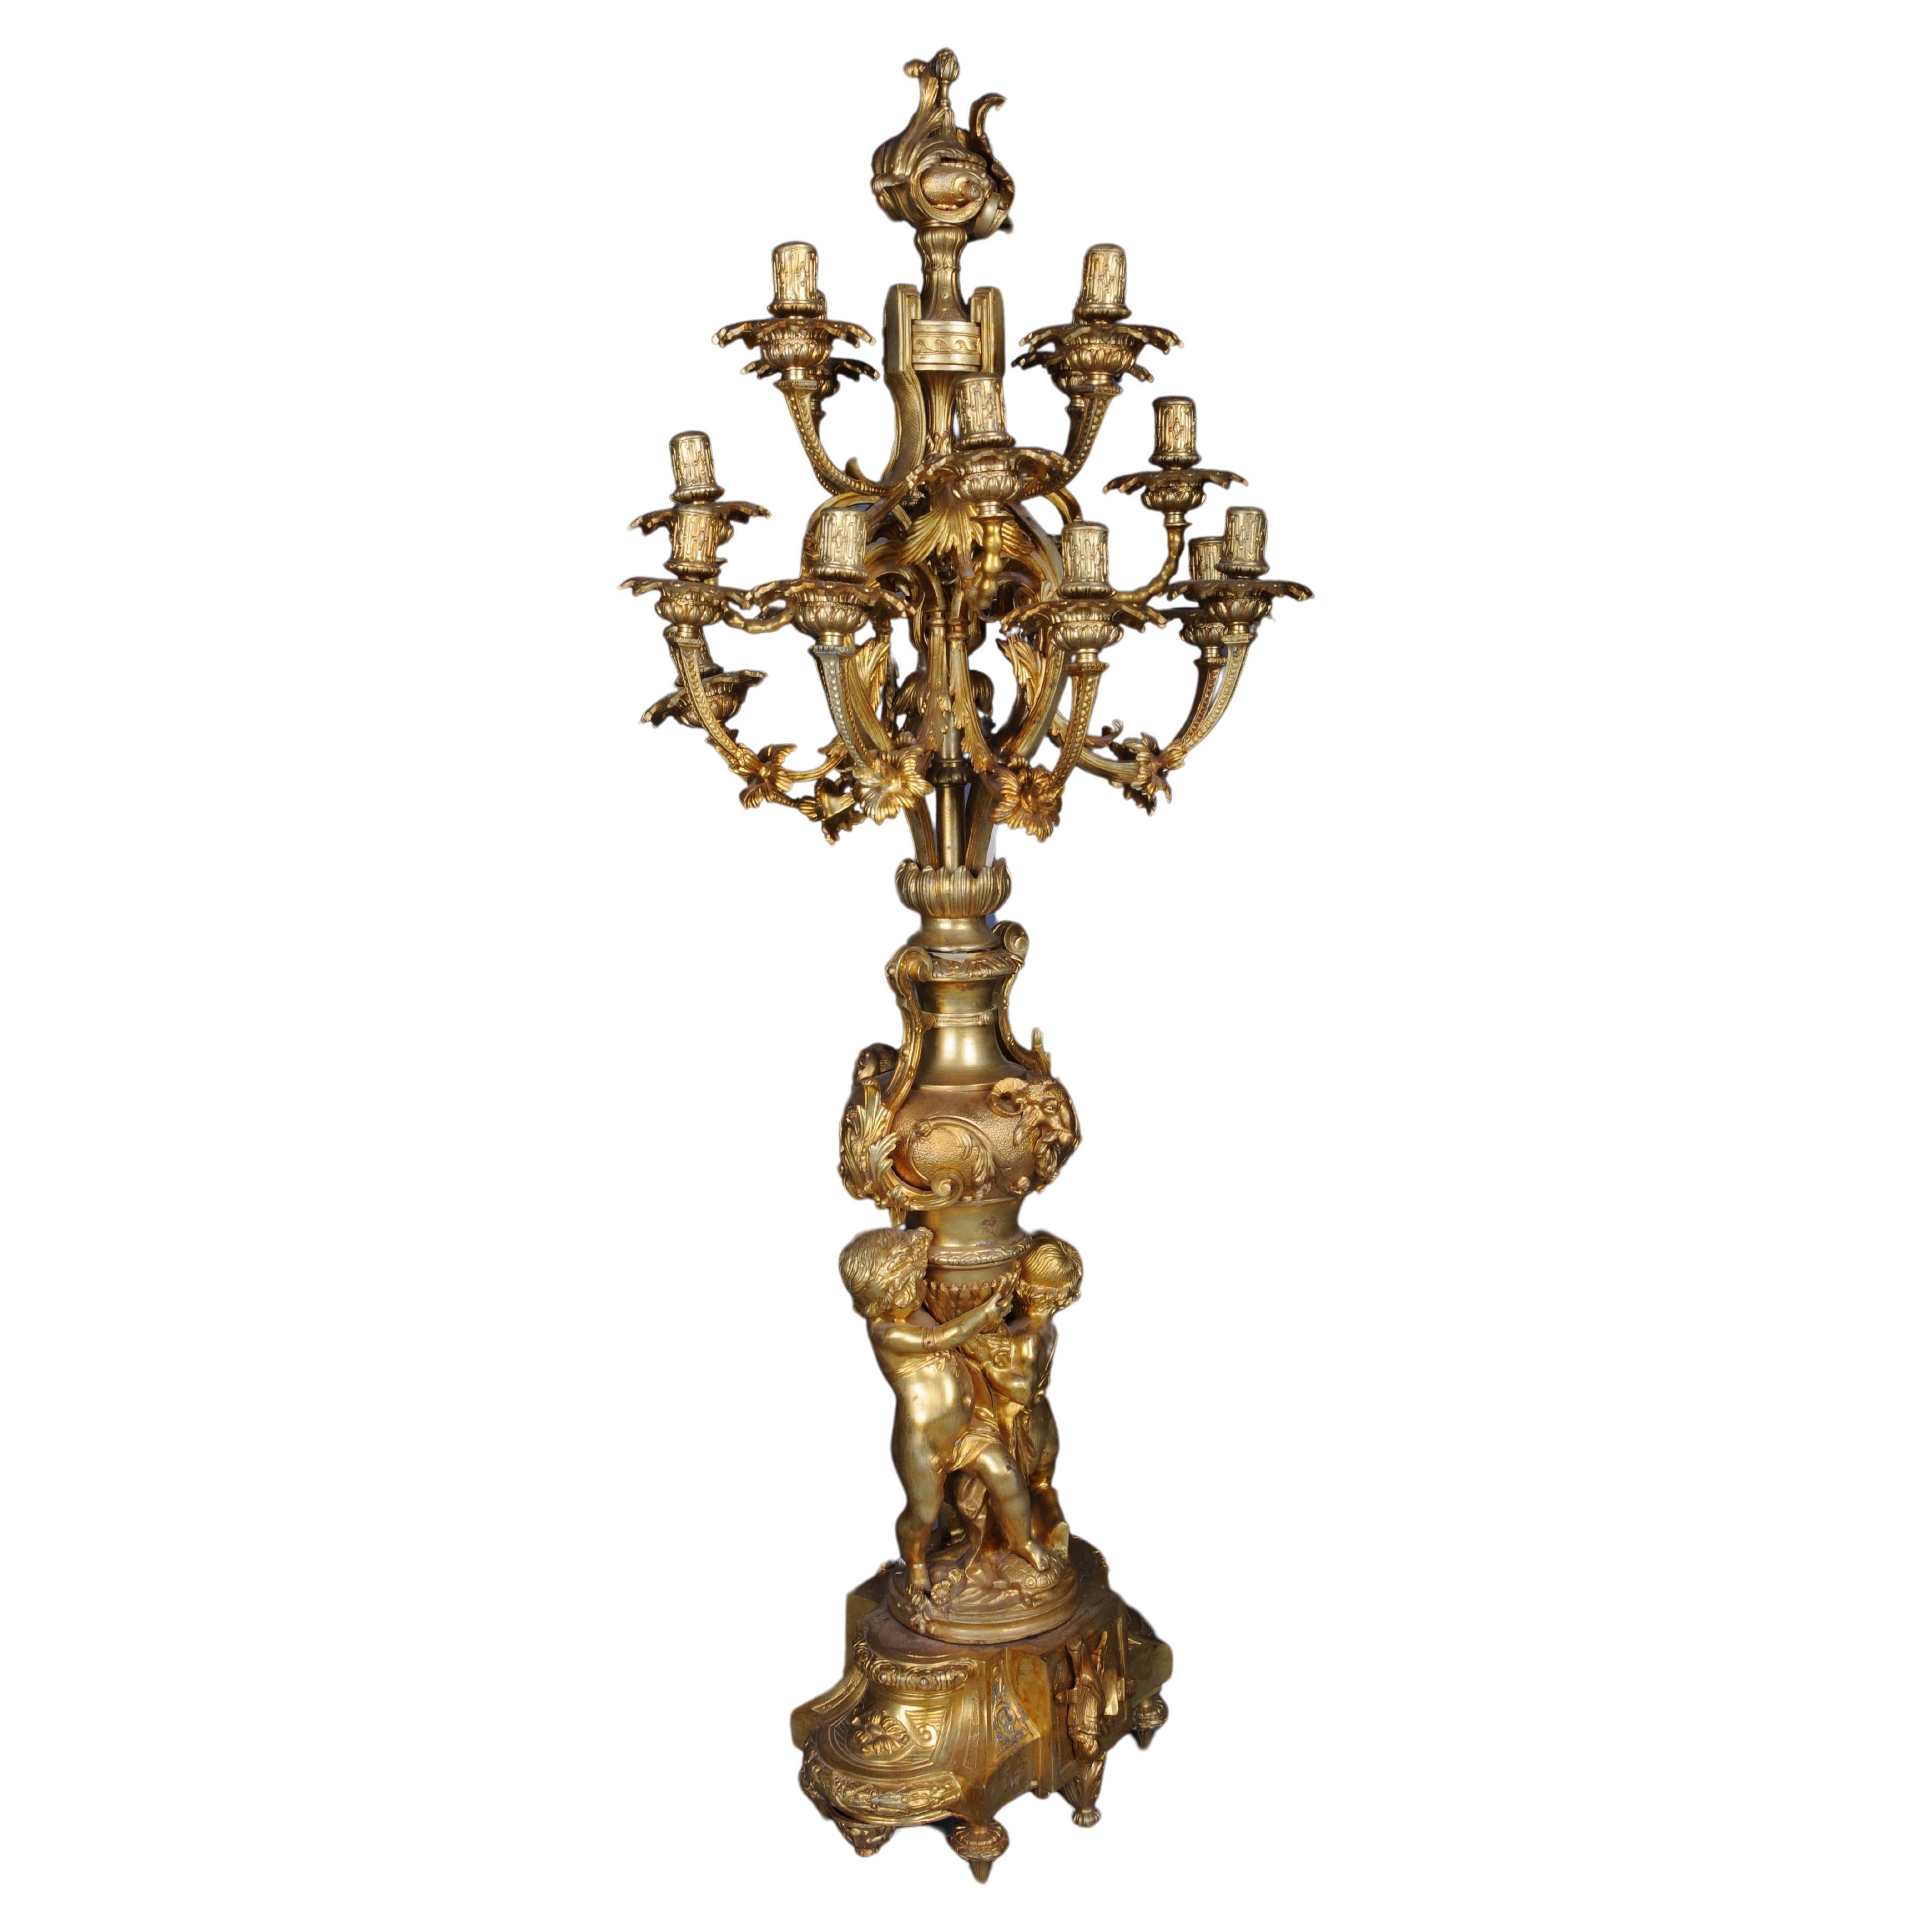 Pair (2) monumental royal candlesticks, gilded bronze, Louis XVI


Solidly made and gold plated. Richly decorated with two puttos. High, magnificent crown with 16 candle nozzles each.
Very decorative and ornate candlesticks.